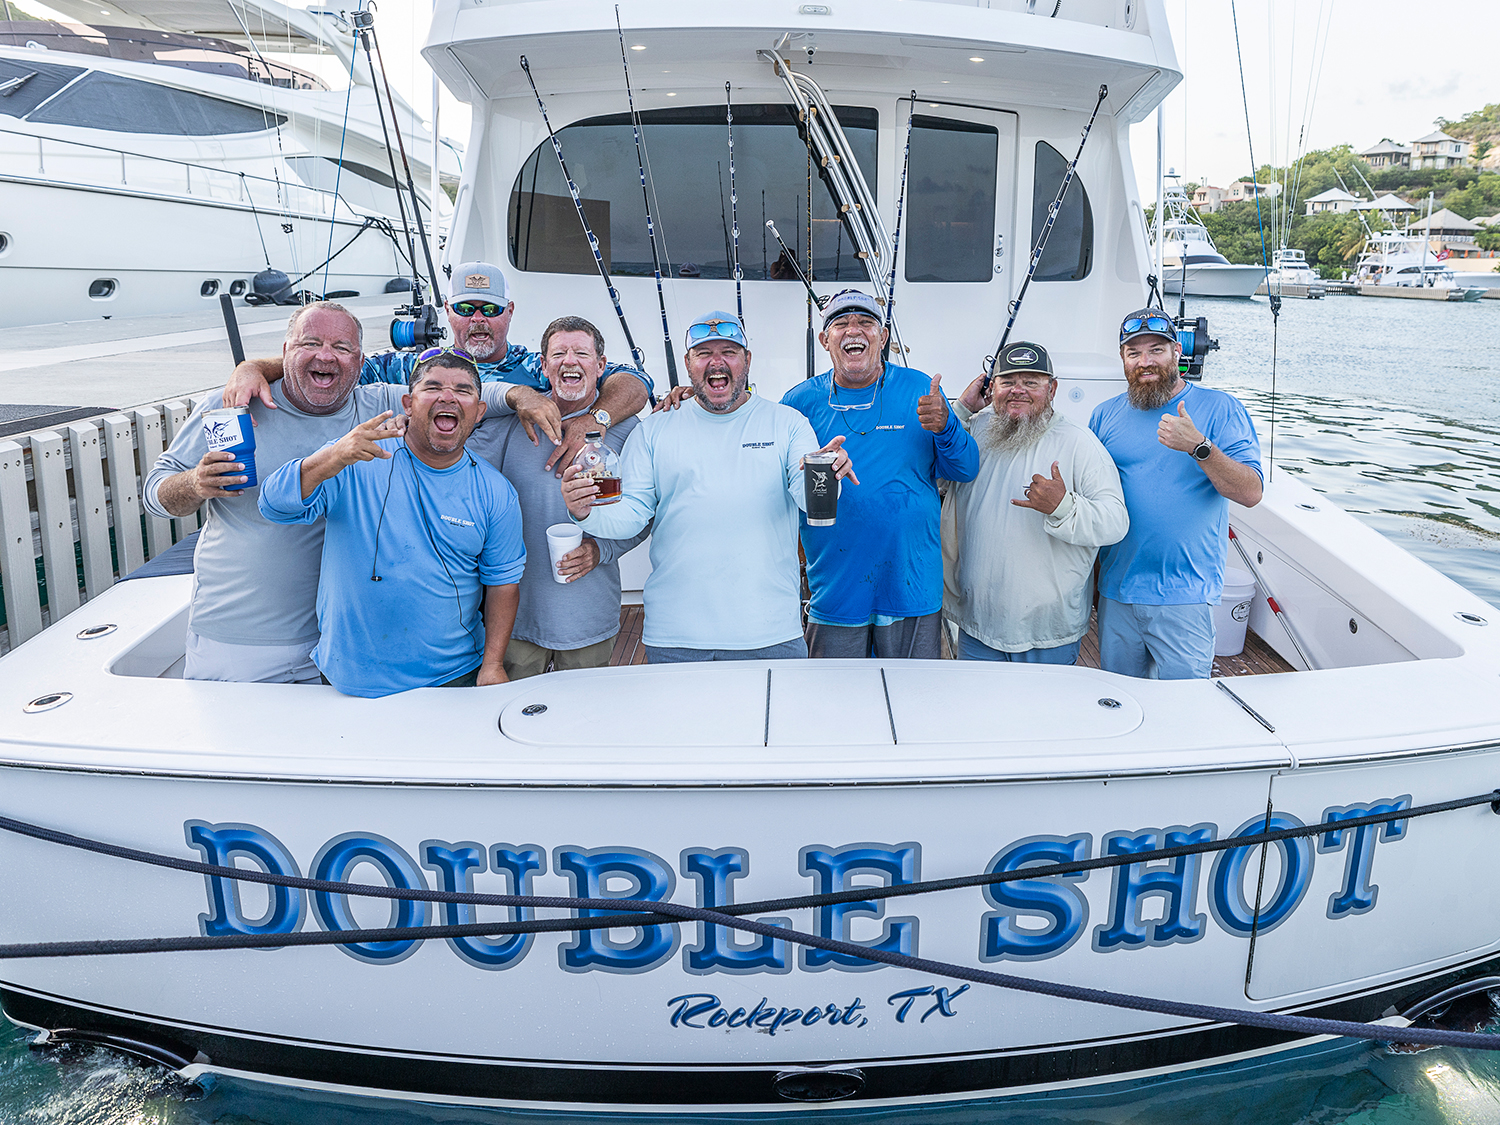 A sport-fishing team celebrates a win on the deck of their sport-fishing boat.